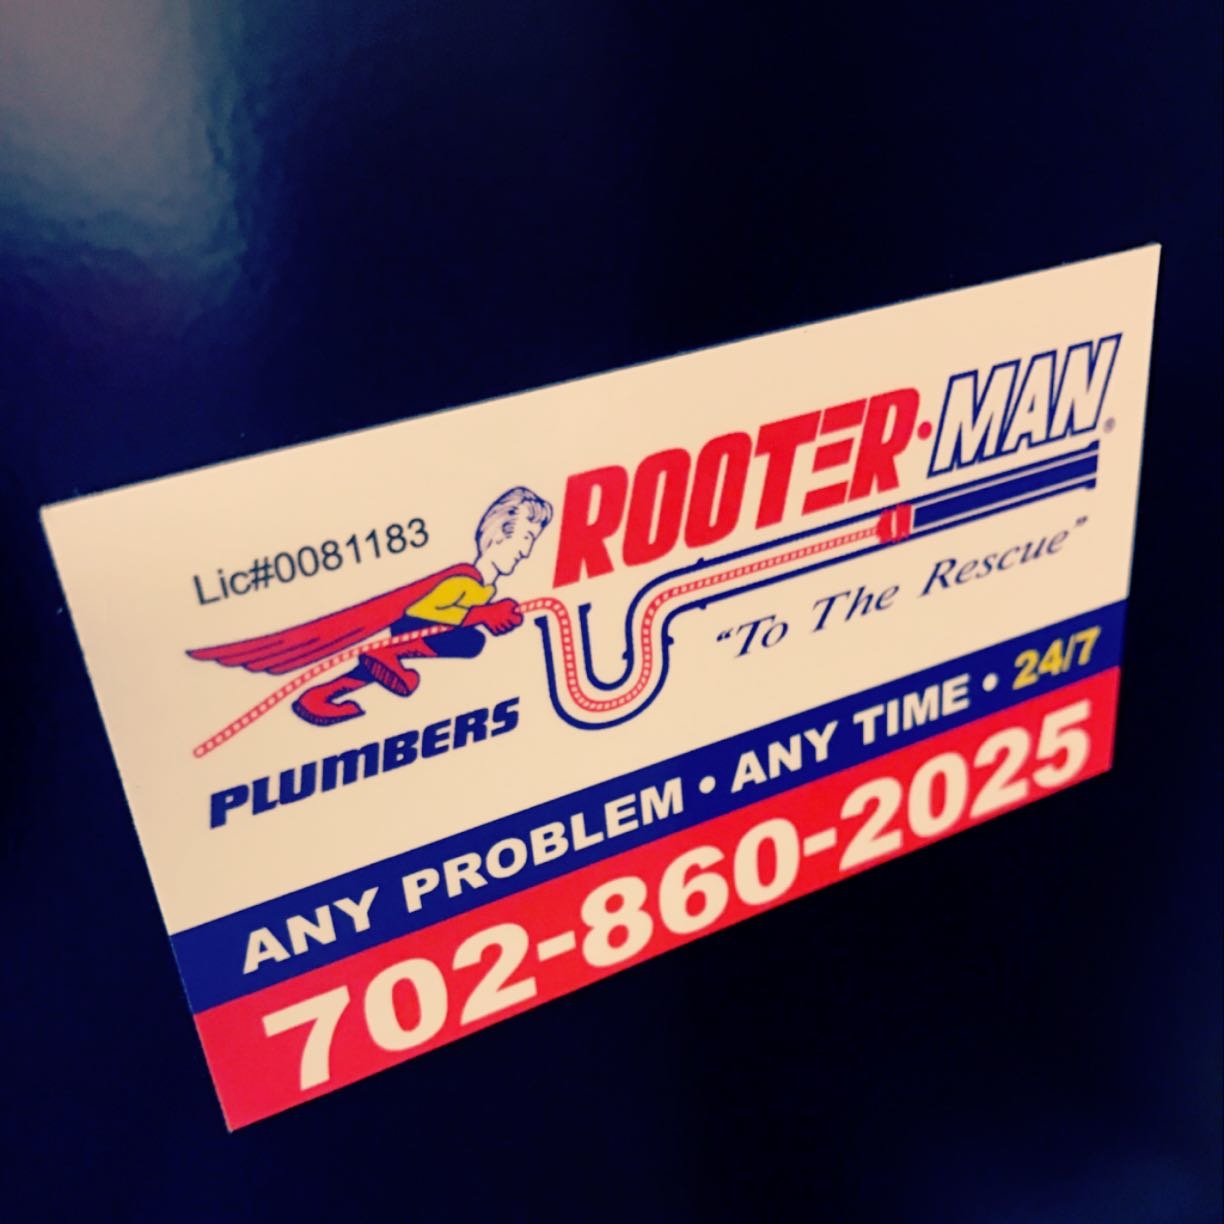 Need a Plumber??? Call now 702-860-2025